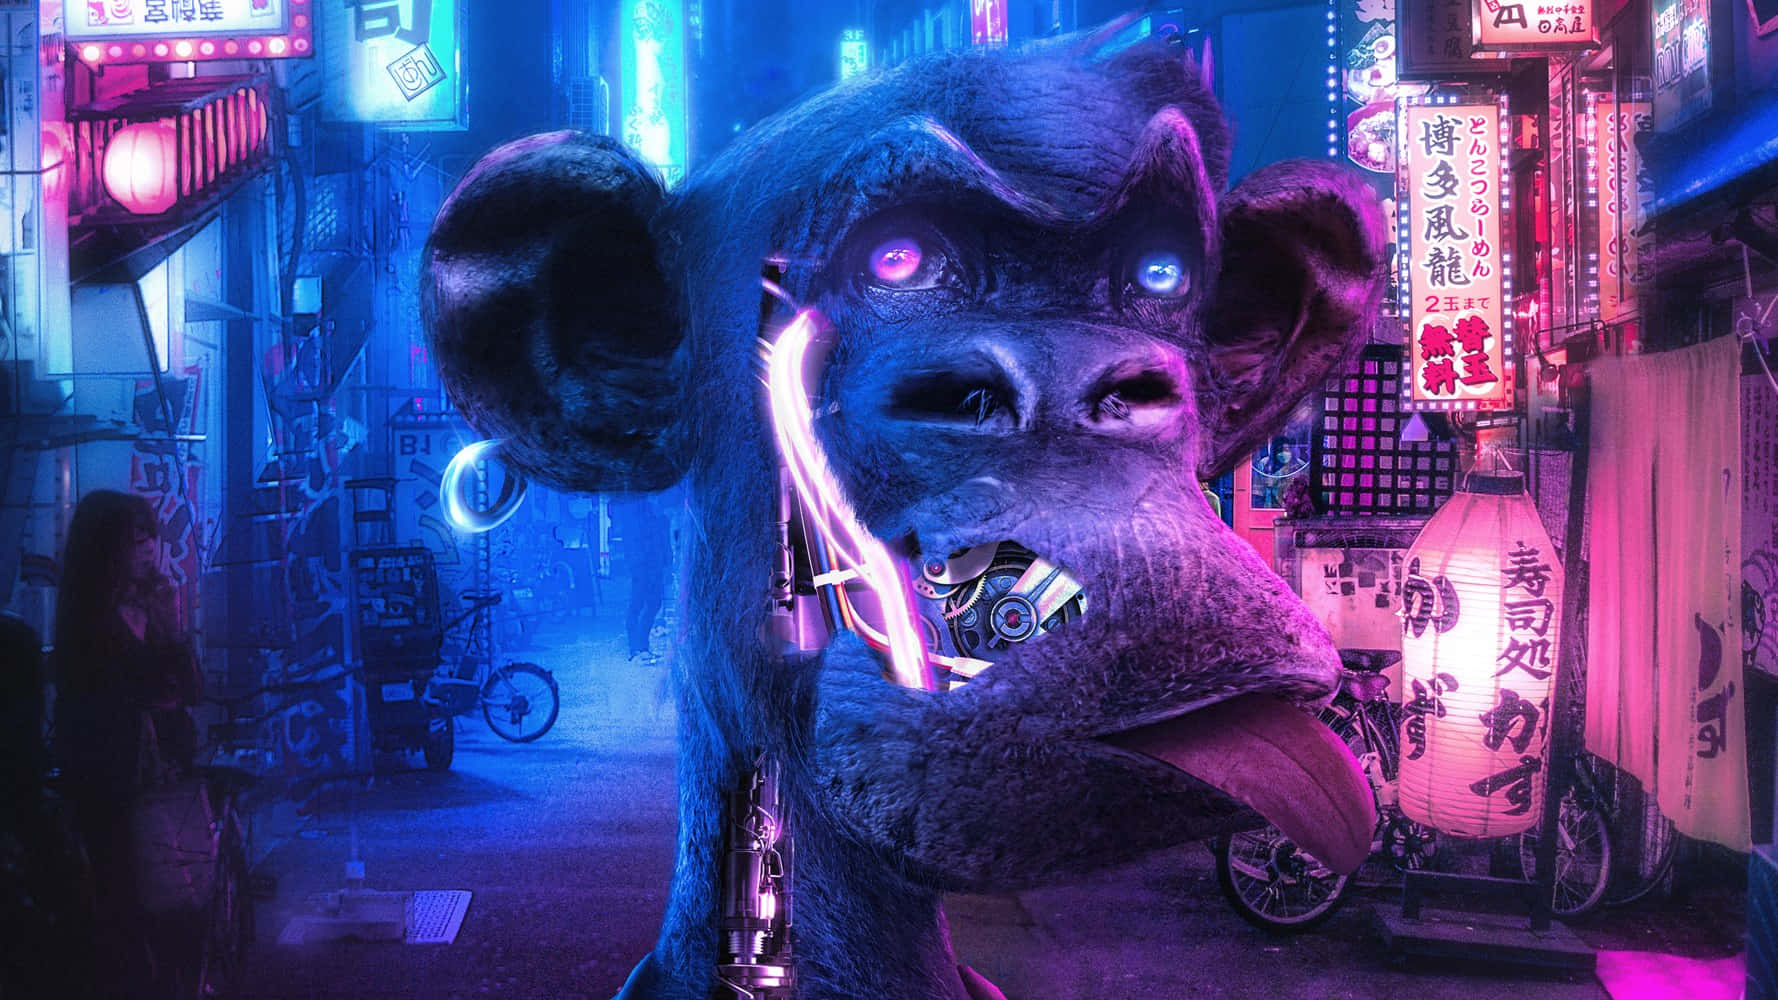 A Monkey In A Neon City With Neon Lights Wallpaper